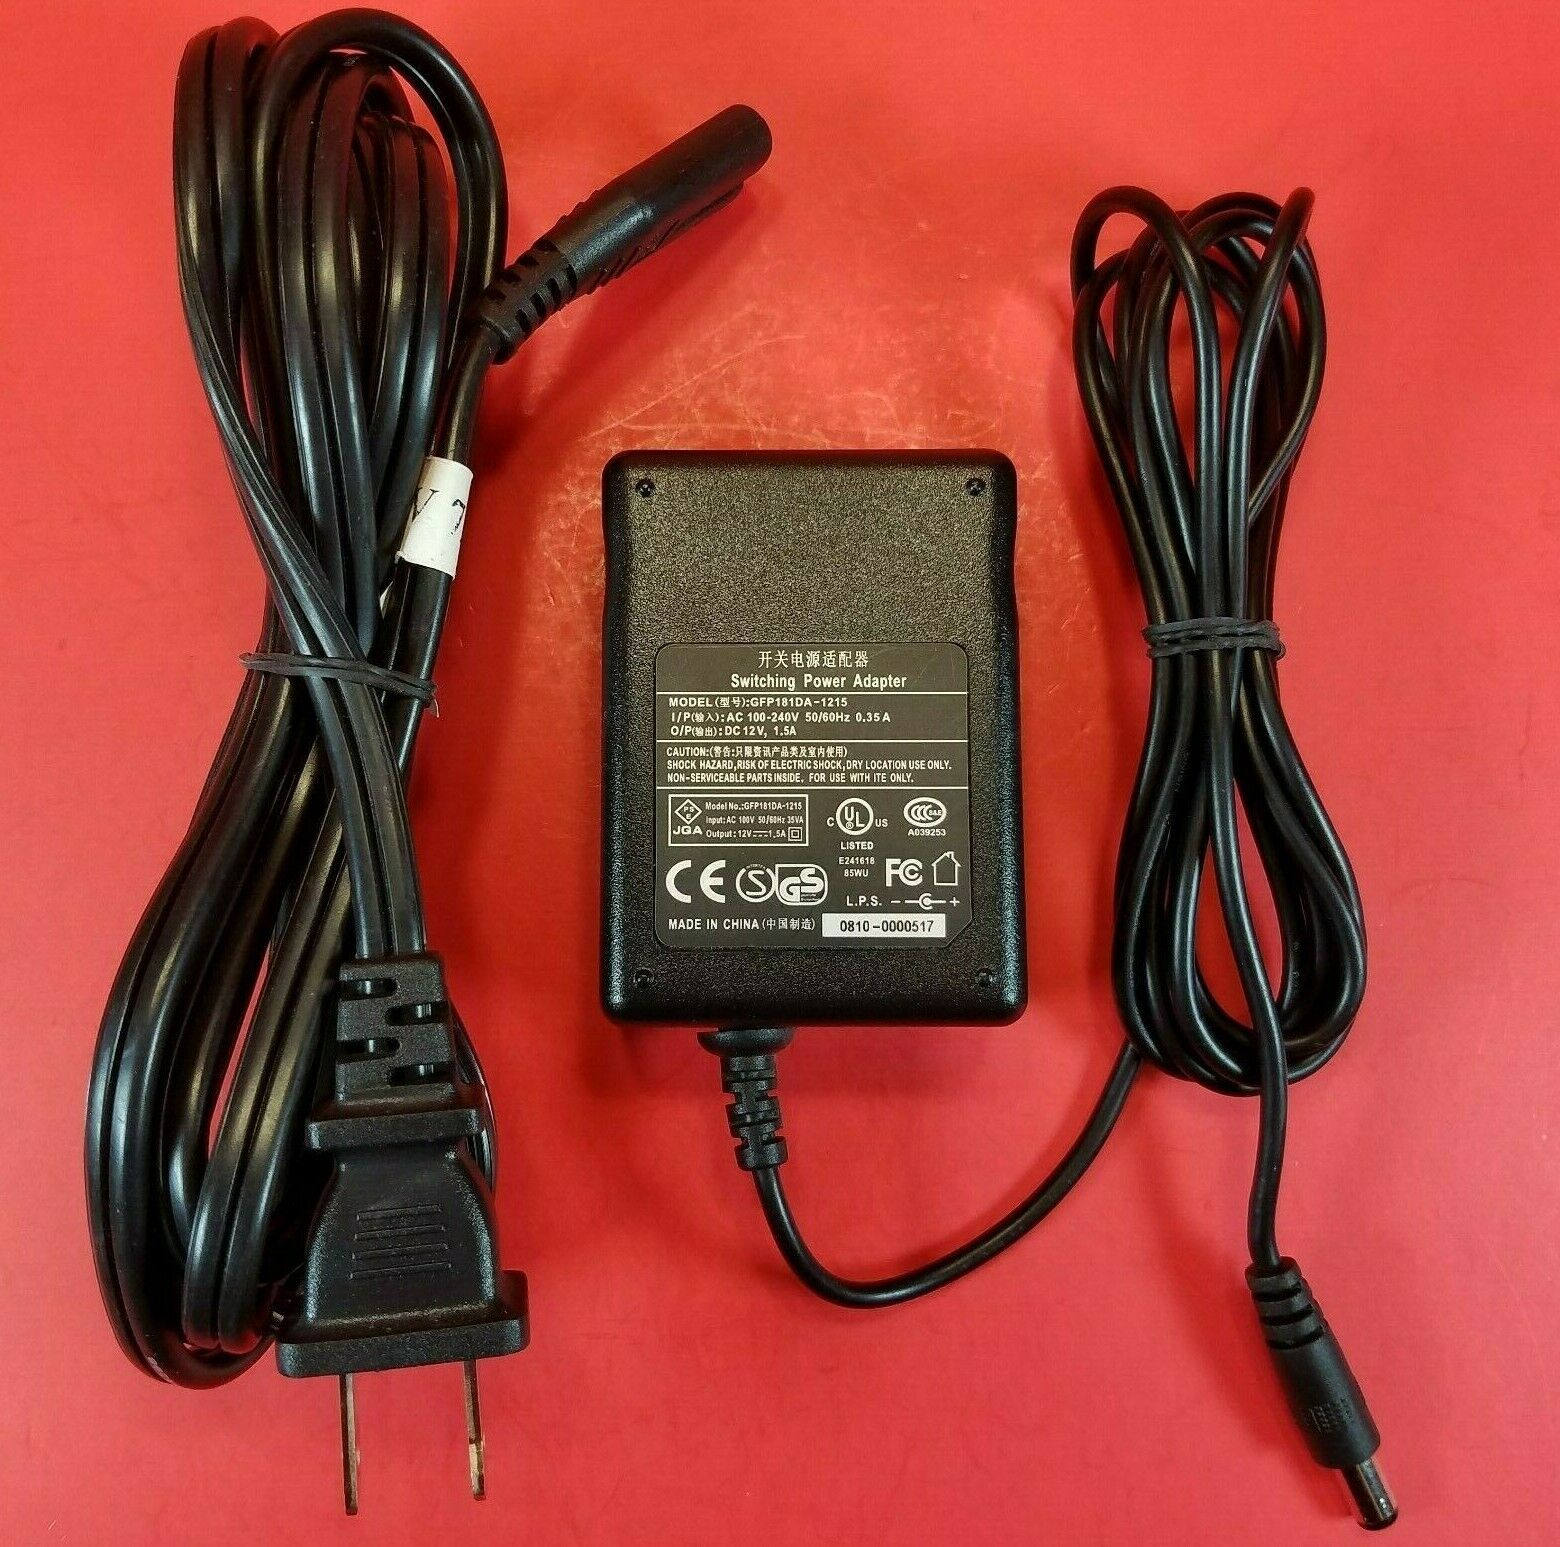 JQA Model No GFP181DA-1215 Switching Power Supply Adapter 12V 1.5A AC/DC Adaptor Type: Switching Power Adapter Featur